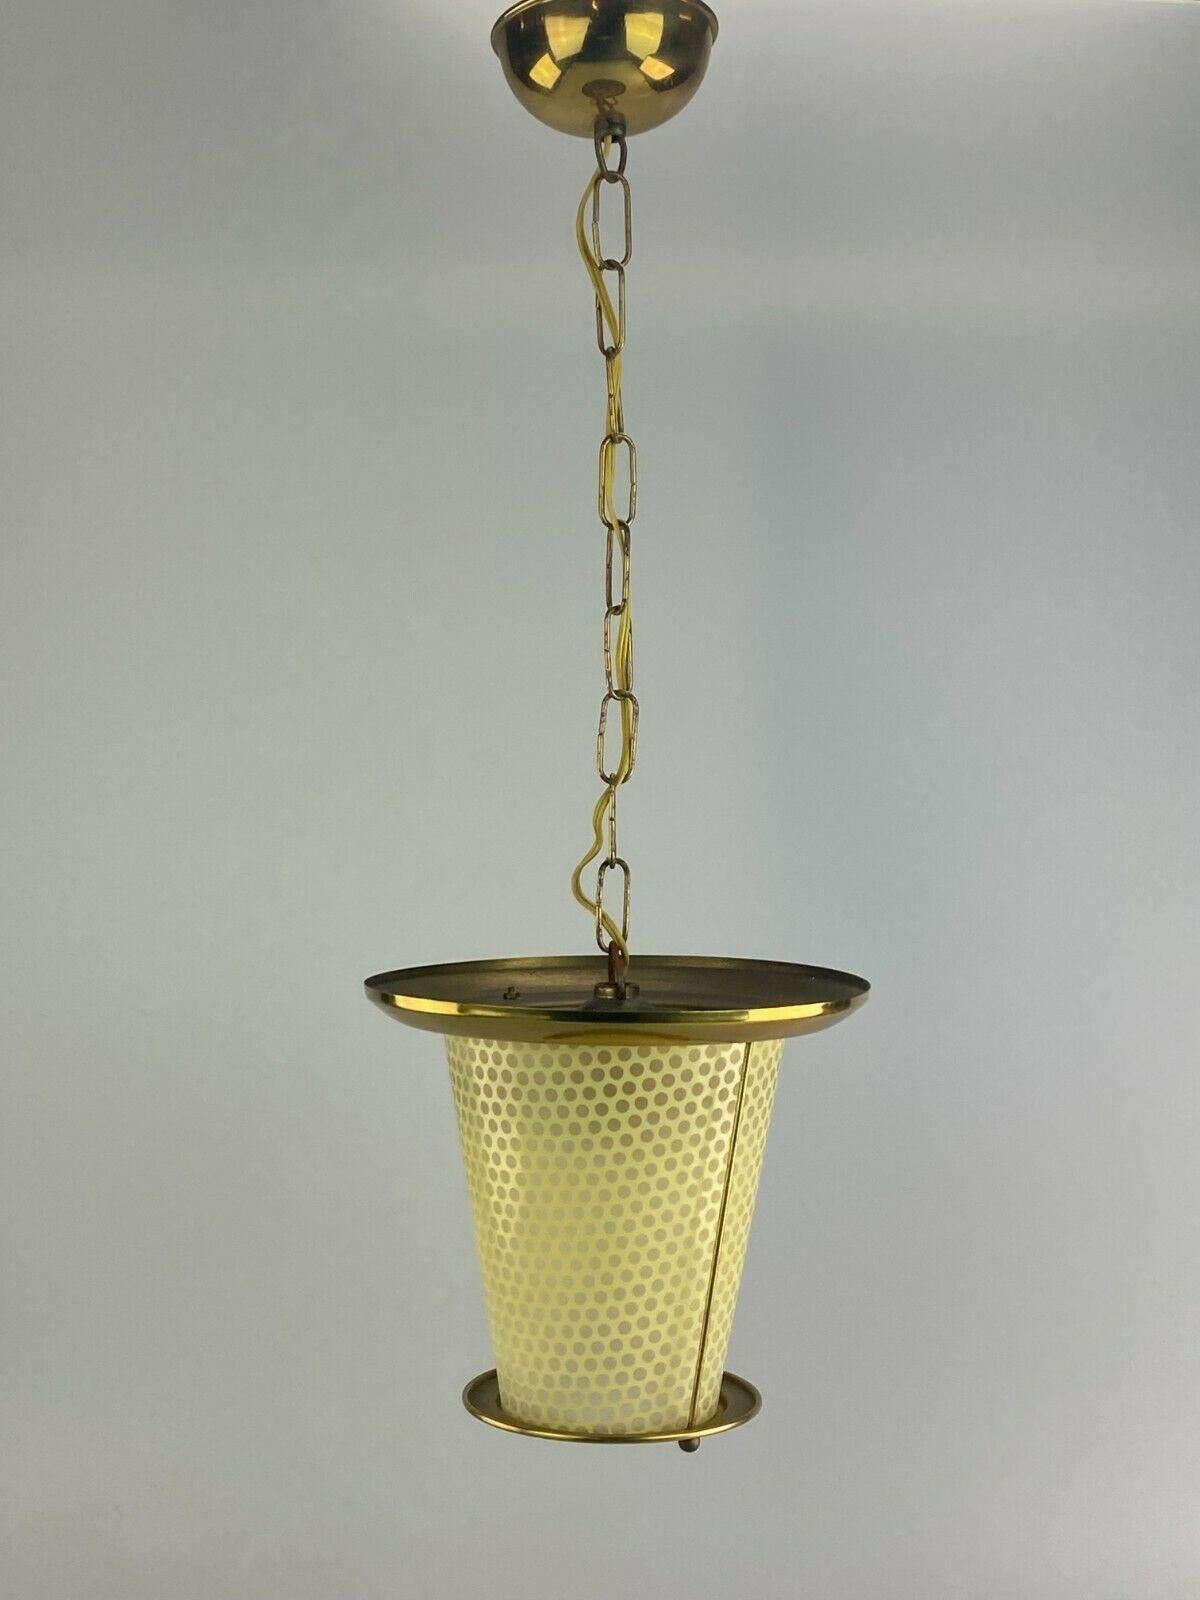 50s 60s Lamp Light Ceiling Lamp Mid Century Brass Design In Good Condition For Sale In Neuenkirchen, NI